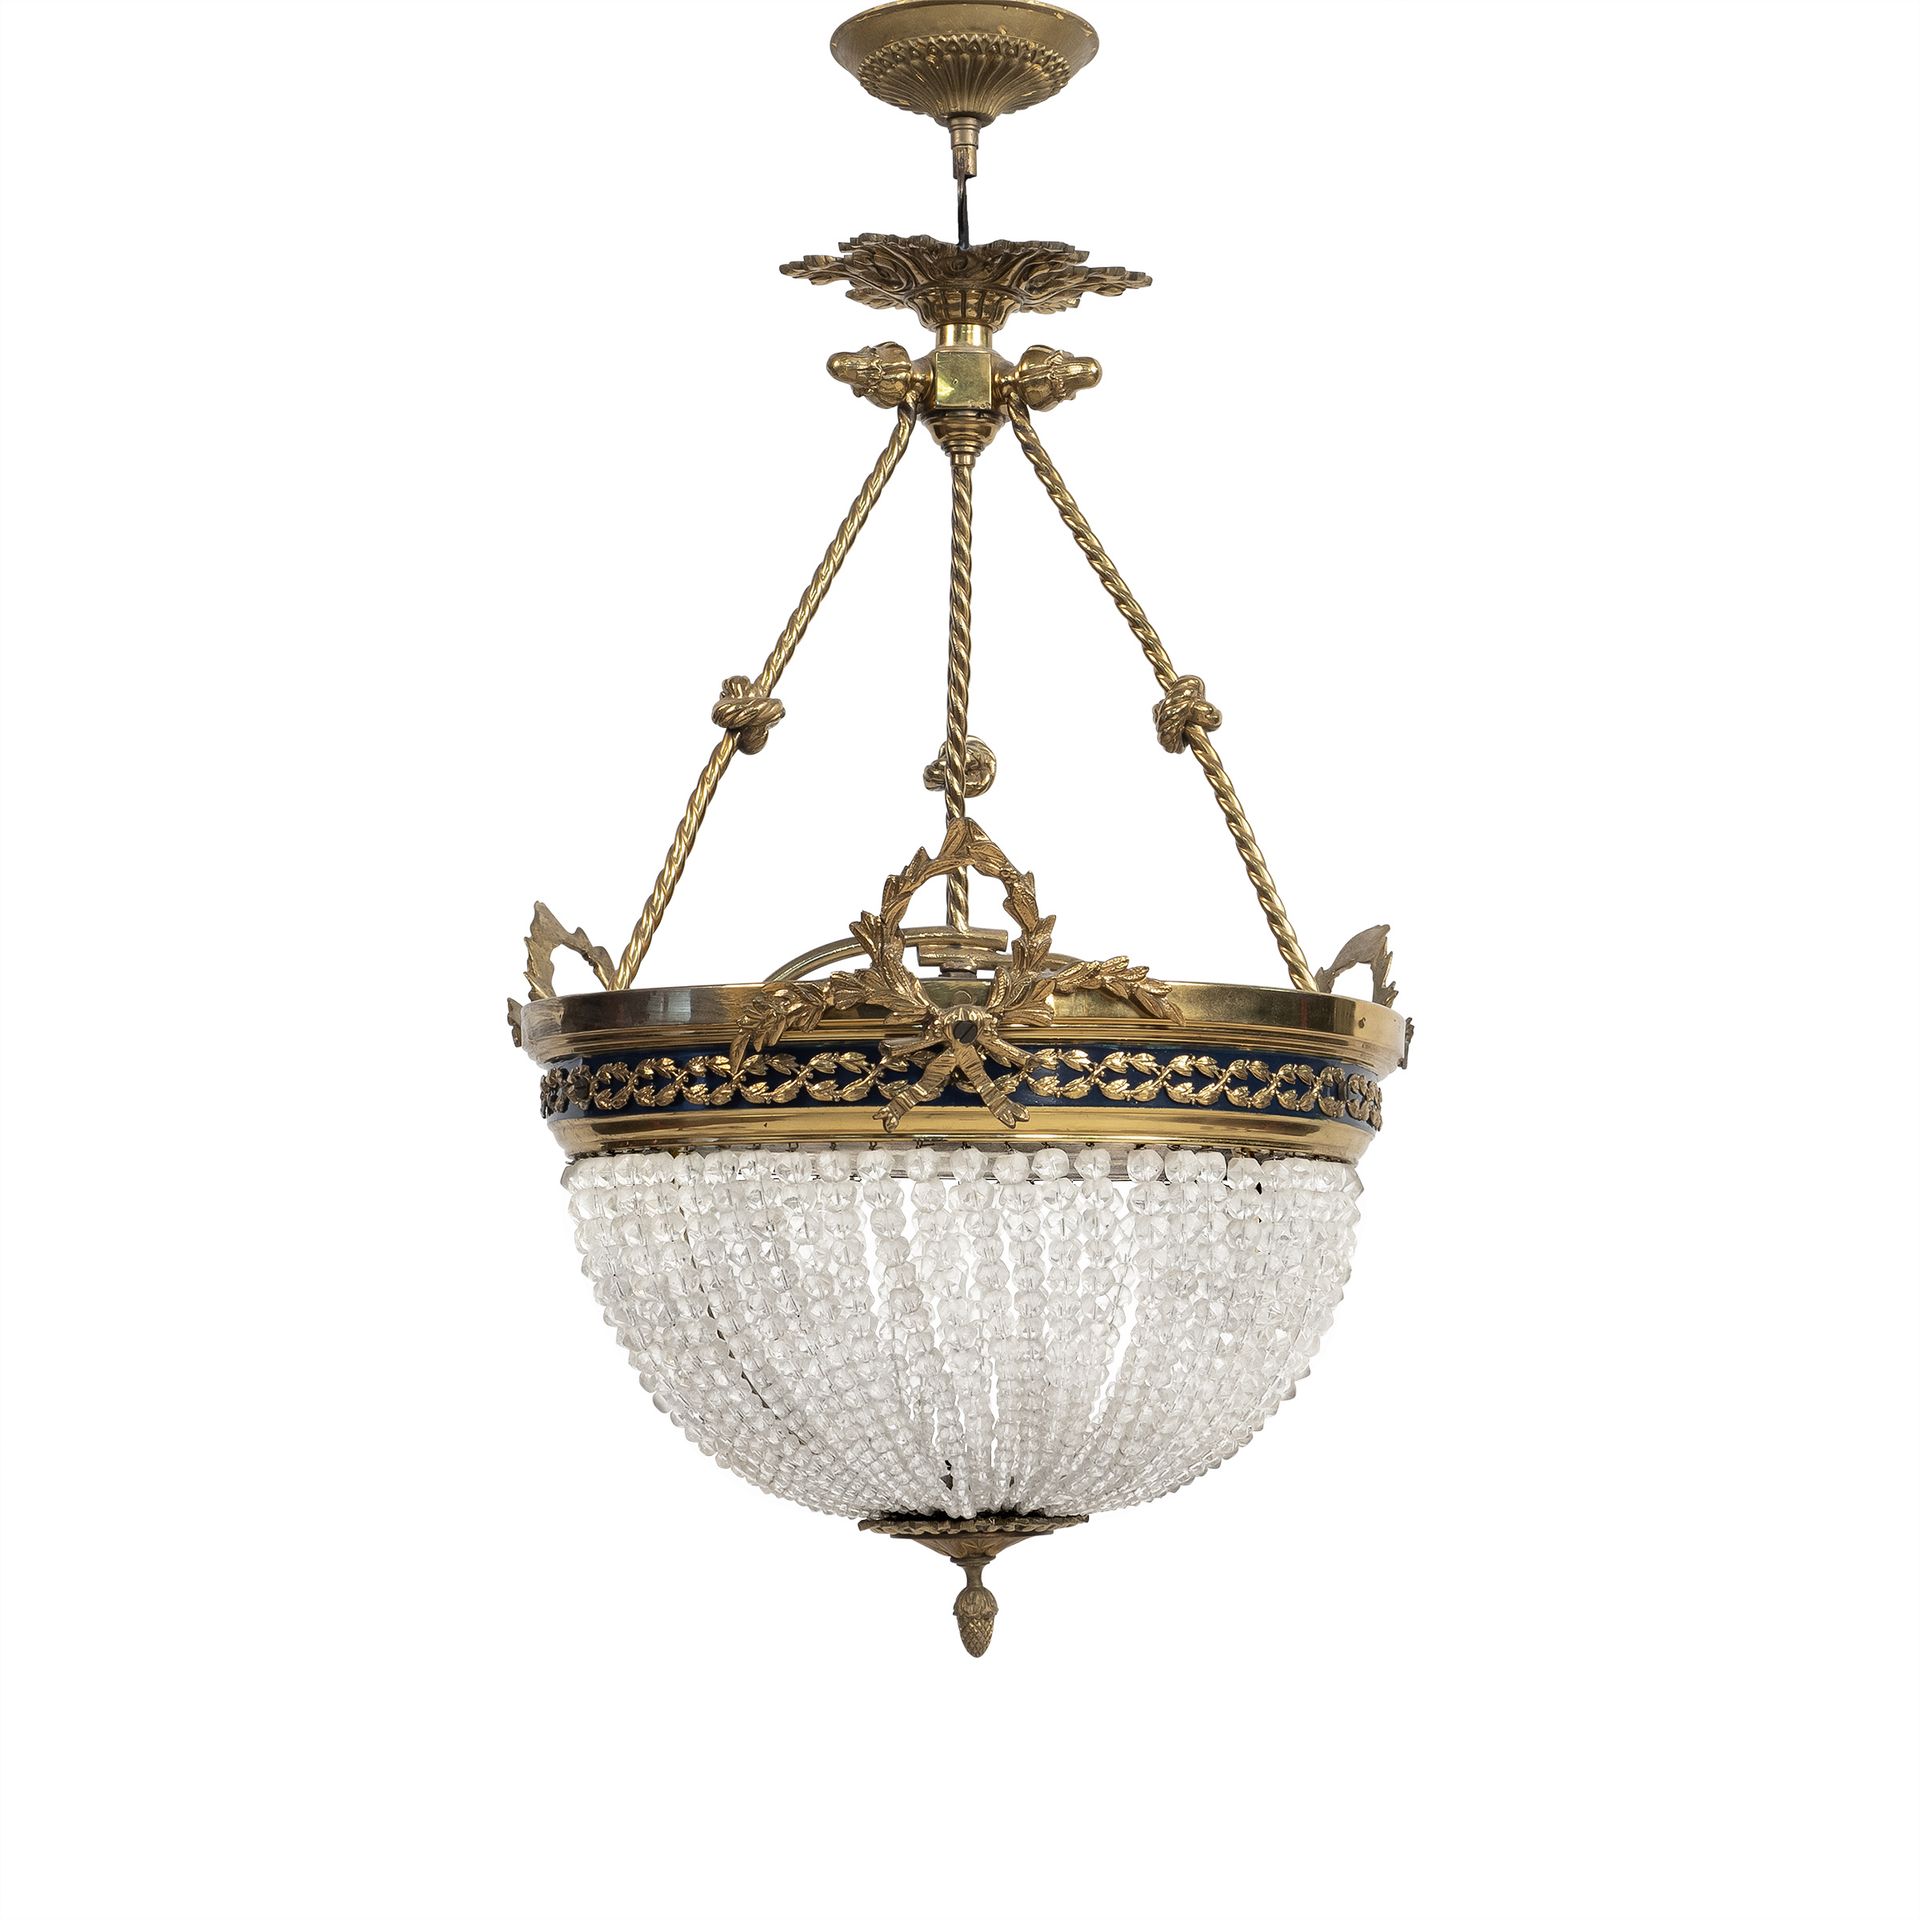 Gilt bronze and glass chandelier France, early 20th century 60x34厘米。